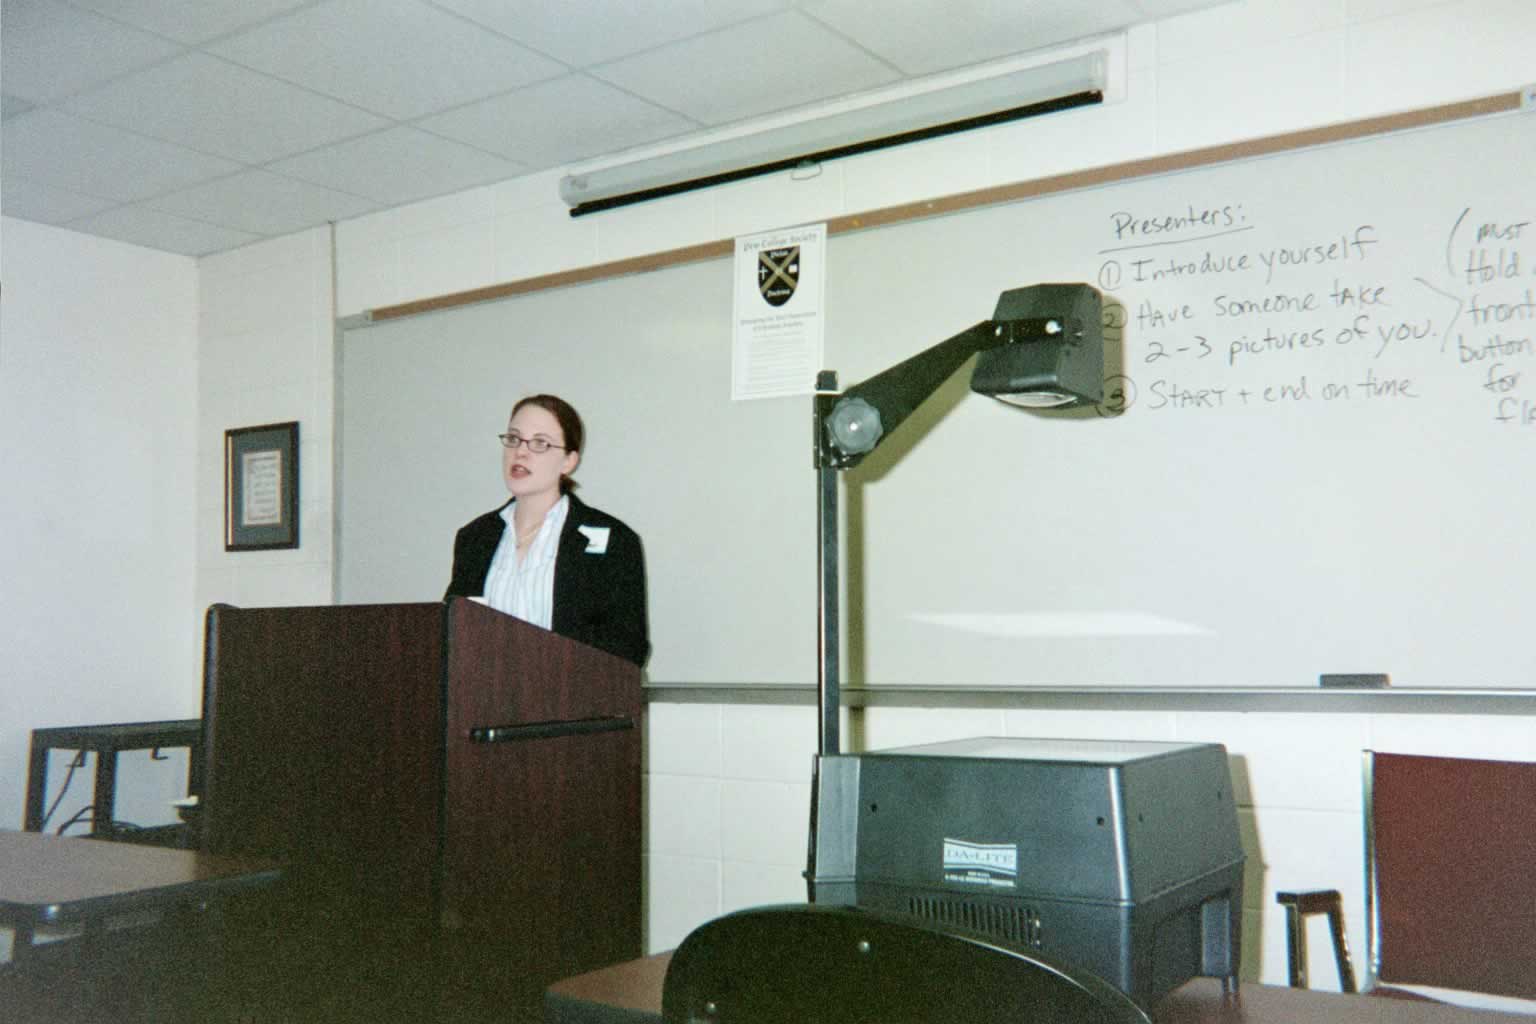 picture of a woman looking up while talking behind a podium in a classroom